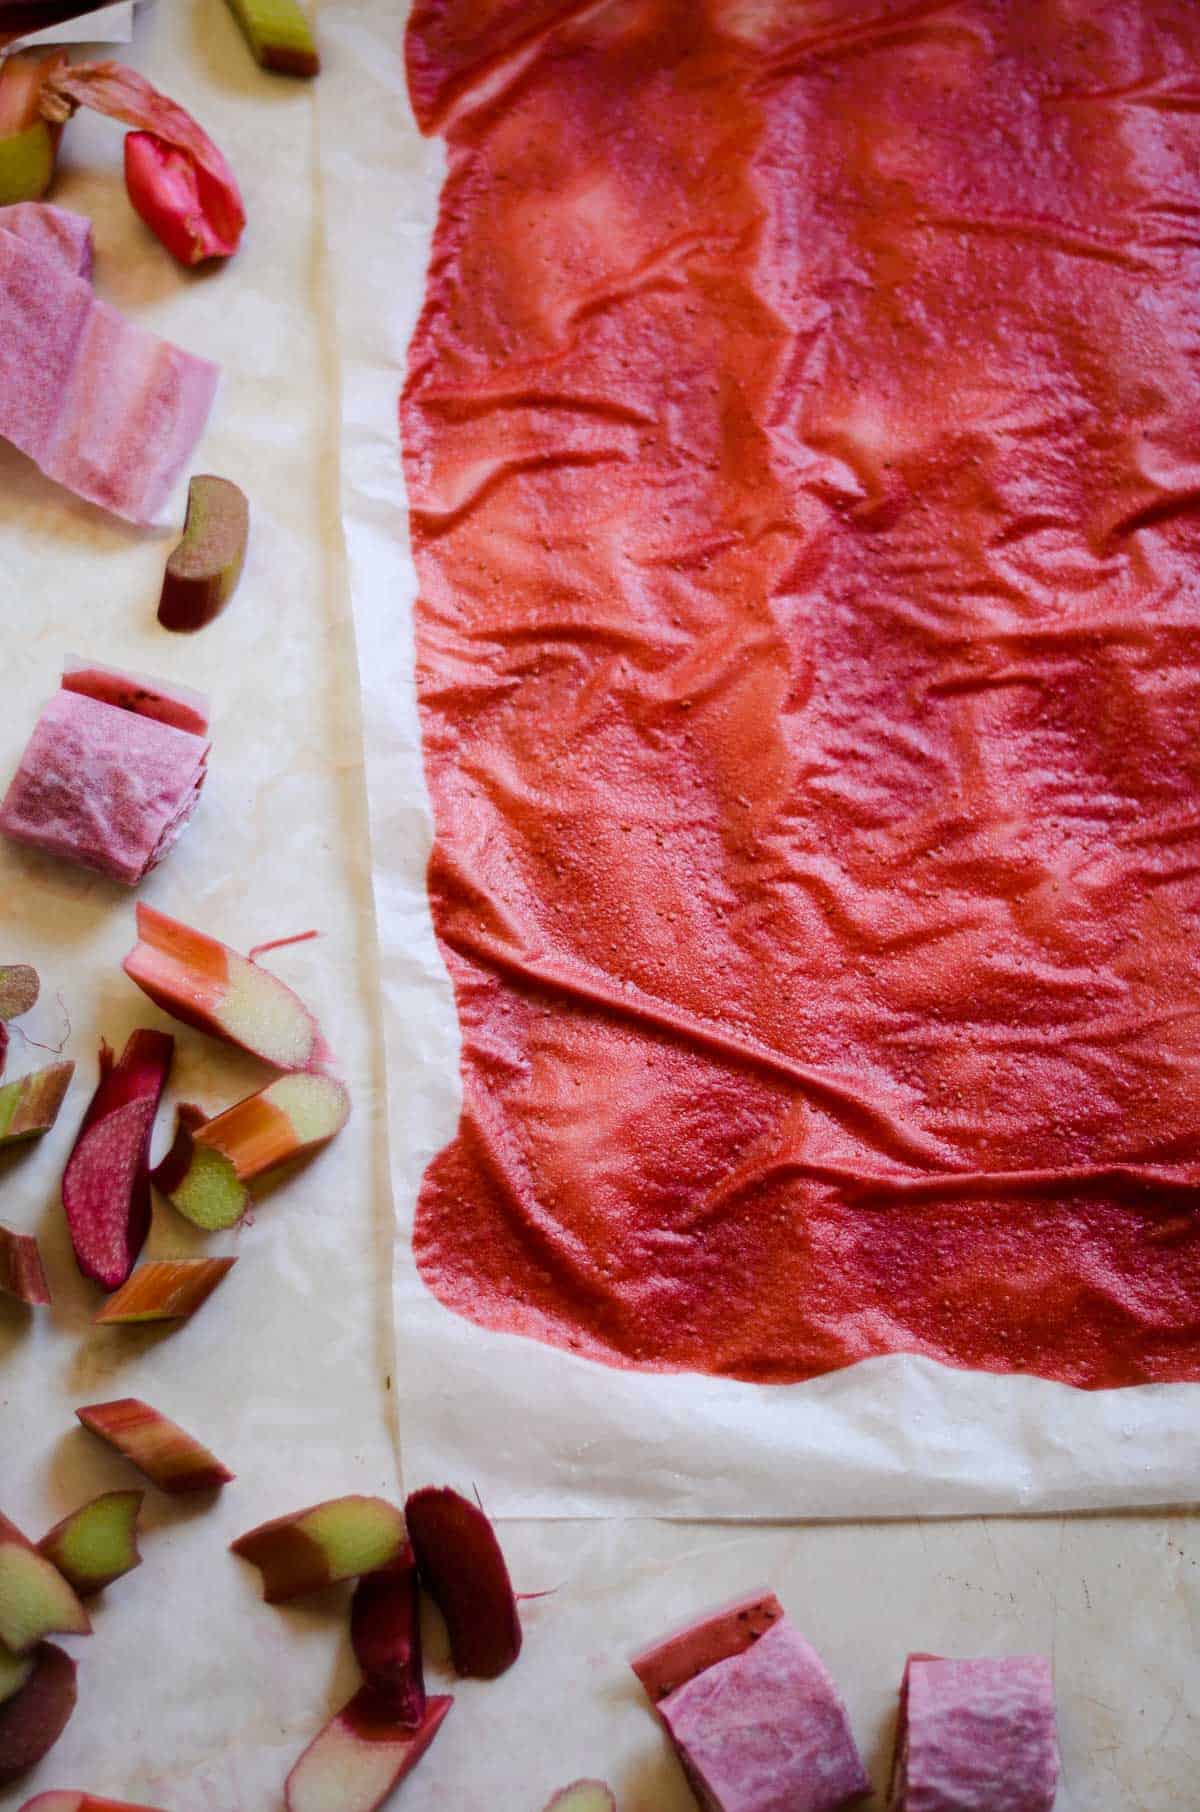 Dried fruit leather on a parchment paper.